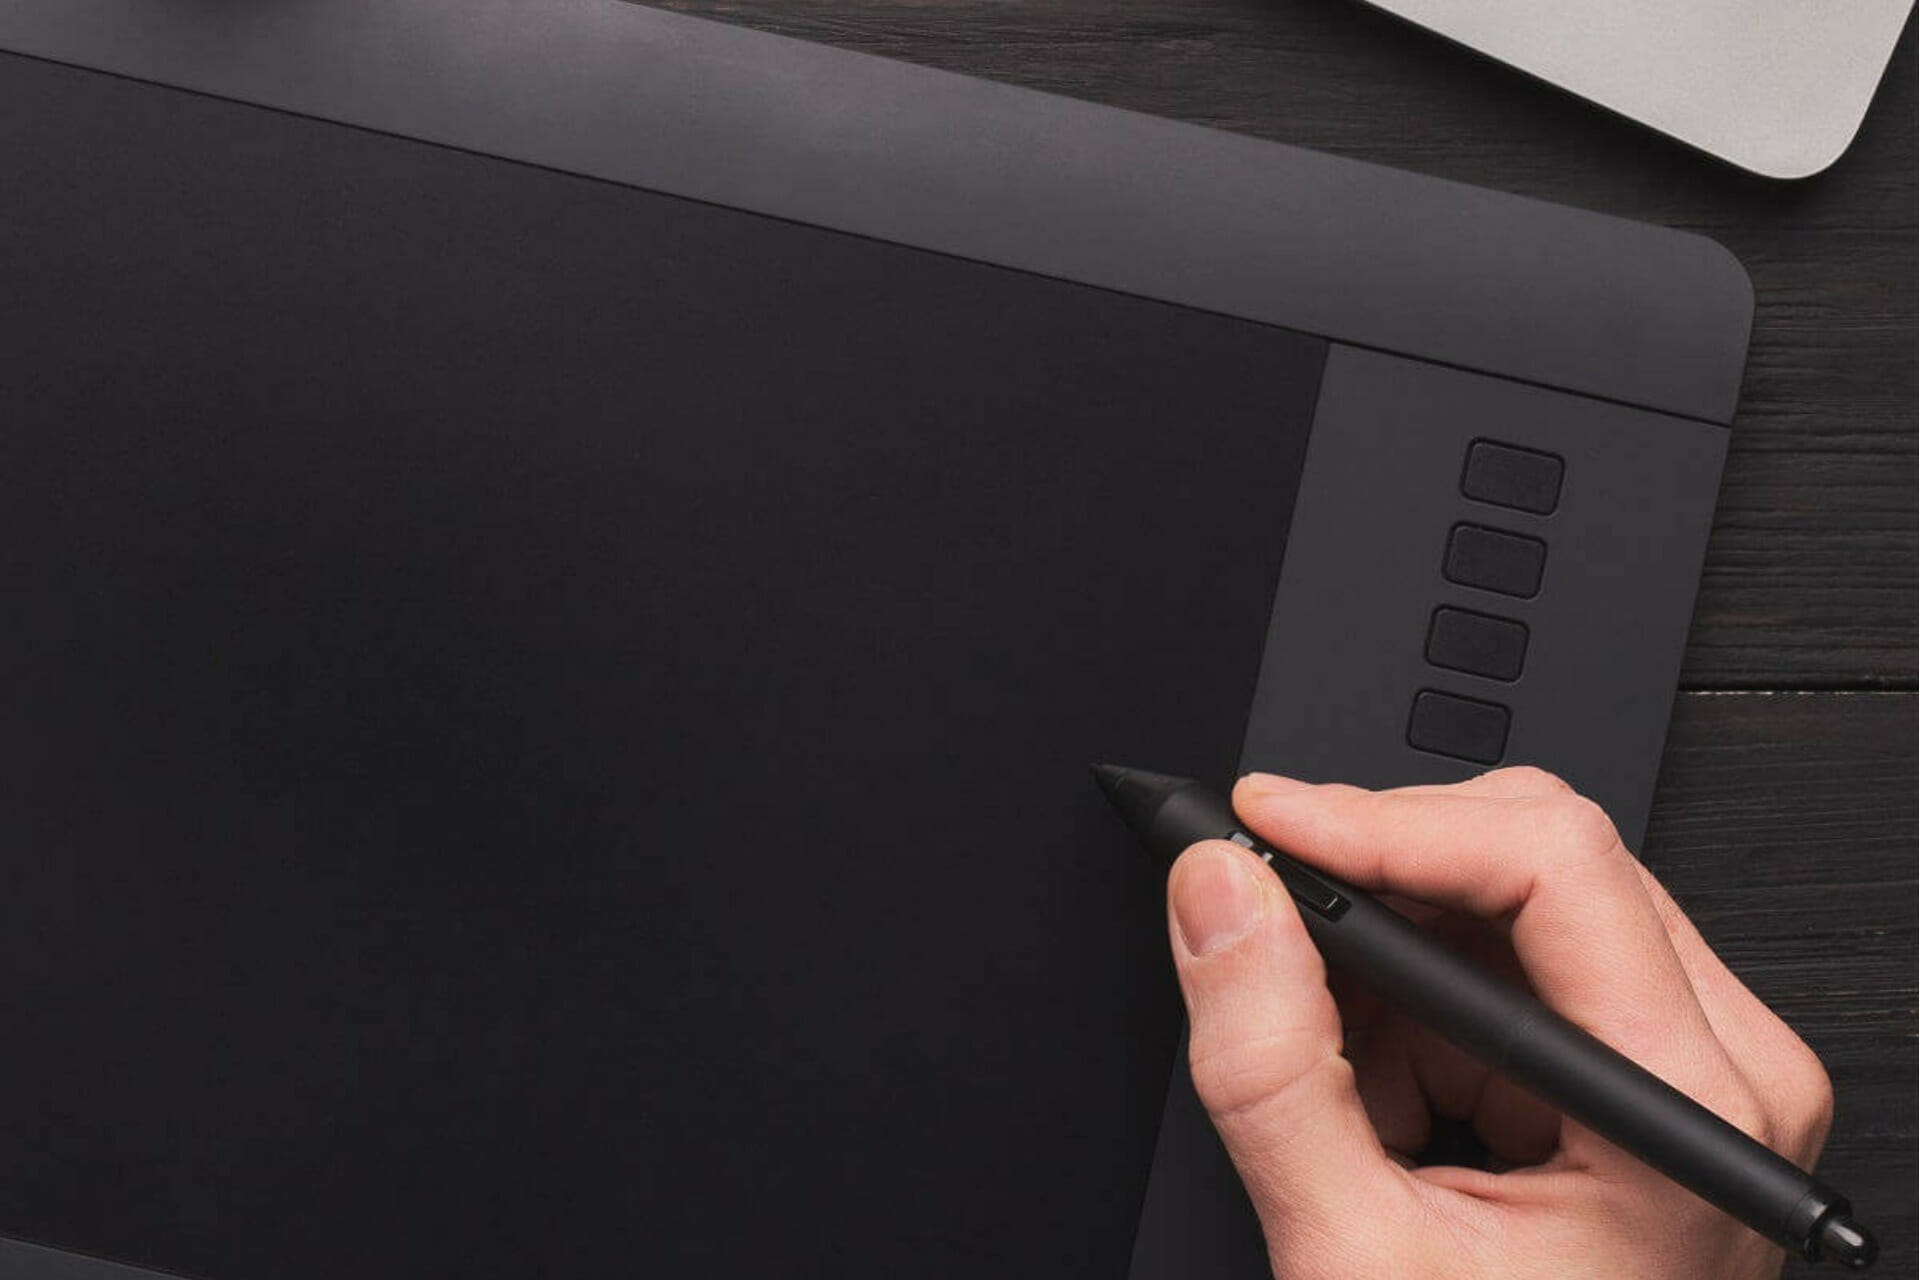 Monoprice Graphic Drawing Tablet Review: Feature-Rich at a Budget Price